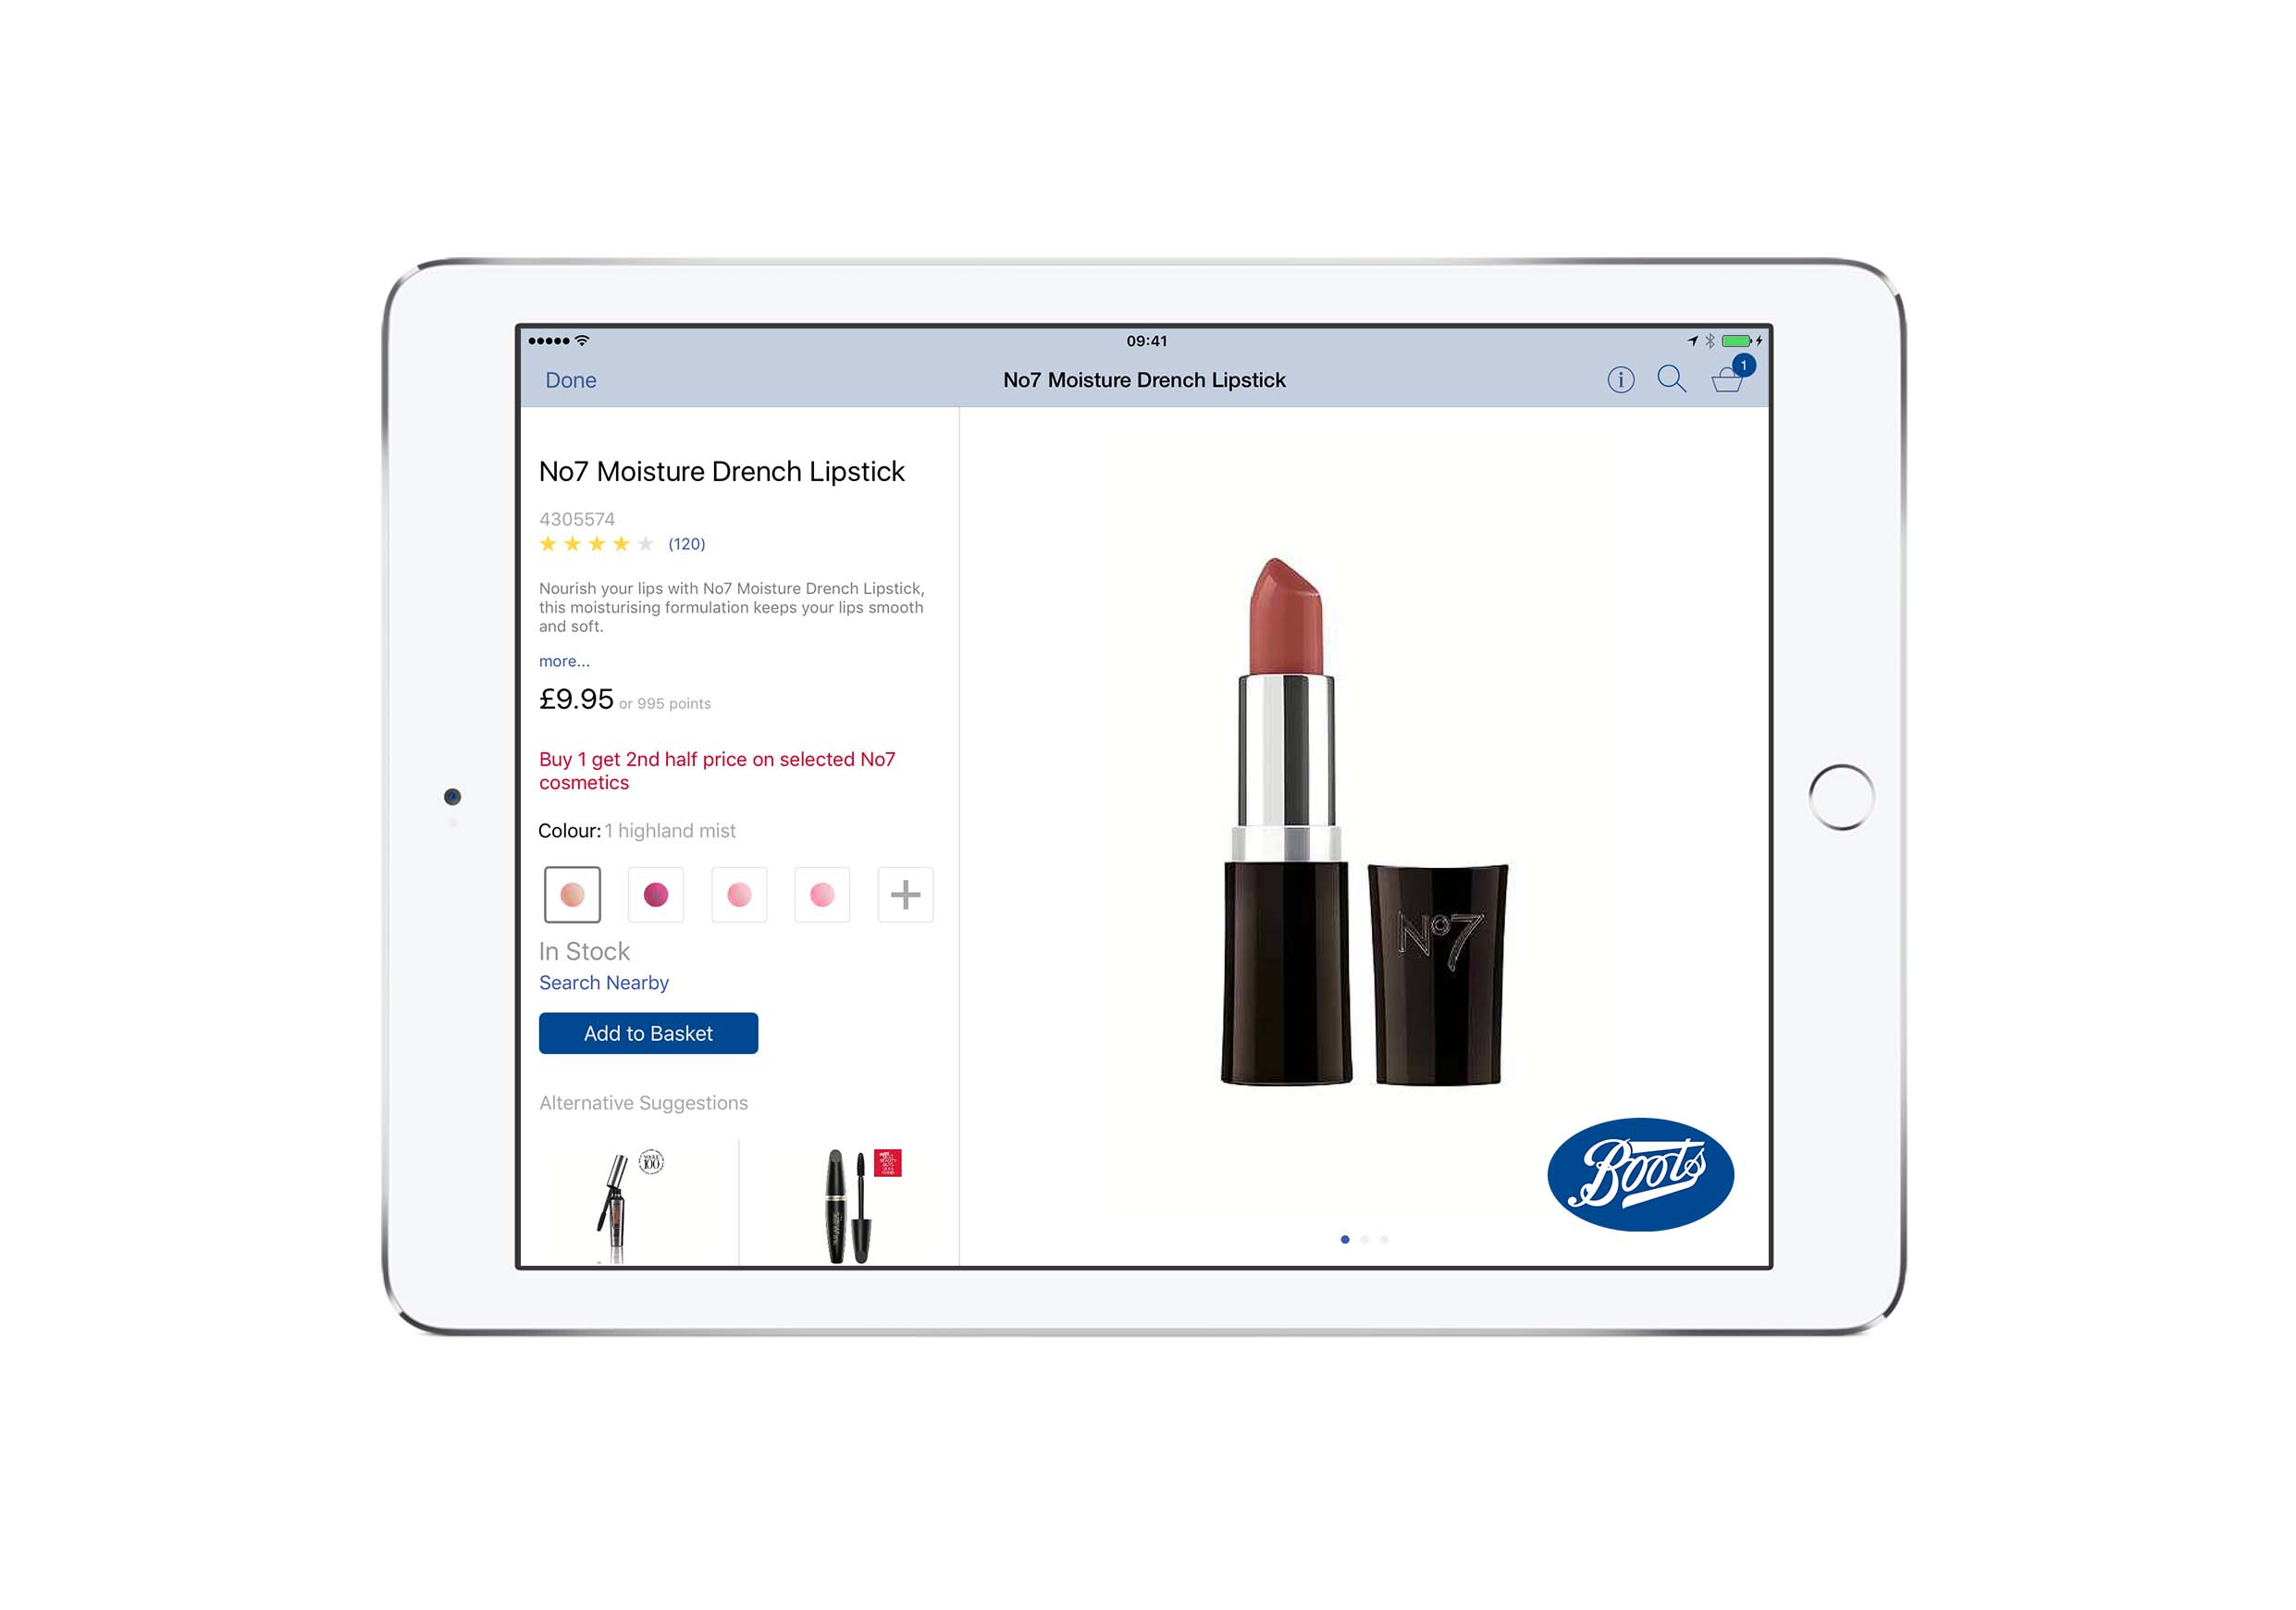 Sales Assist allows Boots colleagues to quickly answer questions about product information and look up inventory. The app also uses online analytics to make product recommendations based on previous customer interest. (Credit IBM)